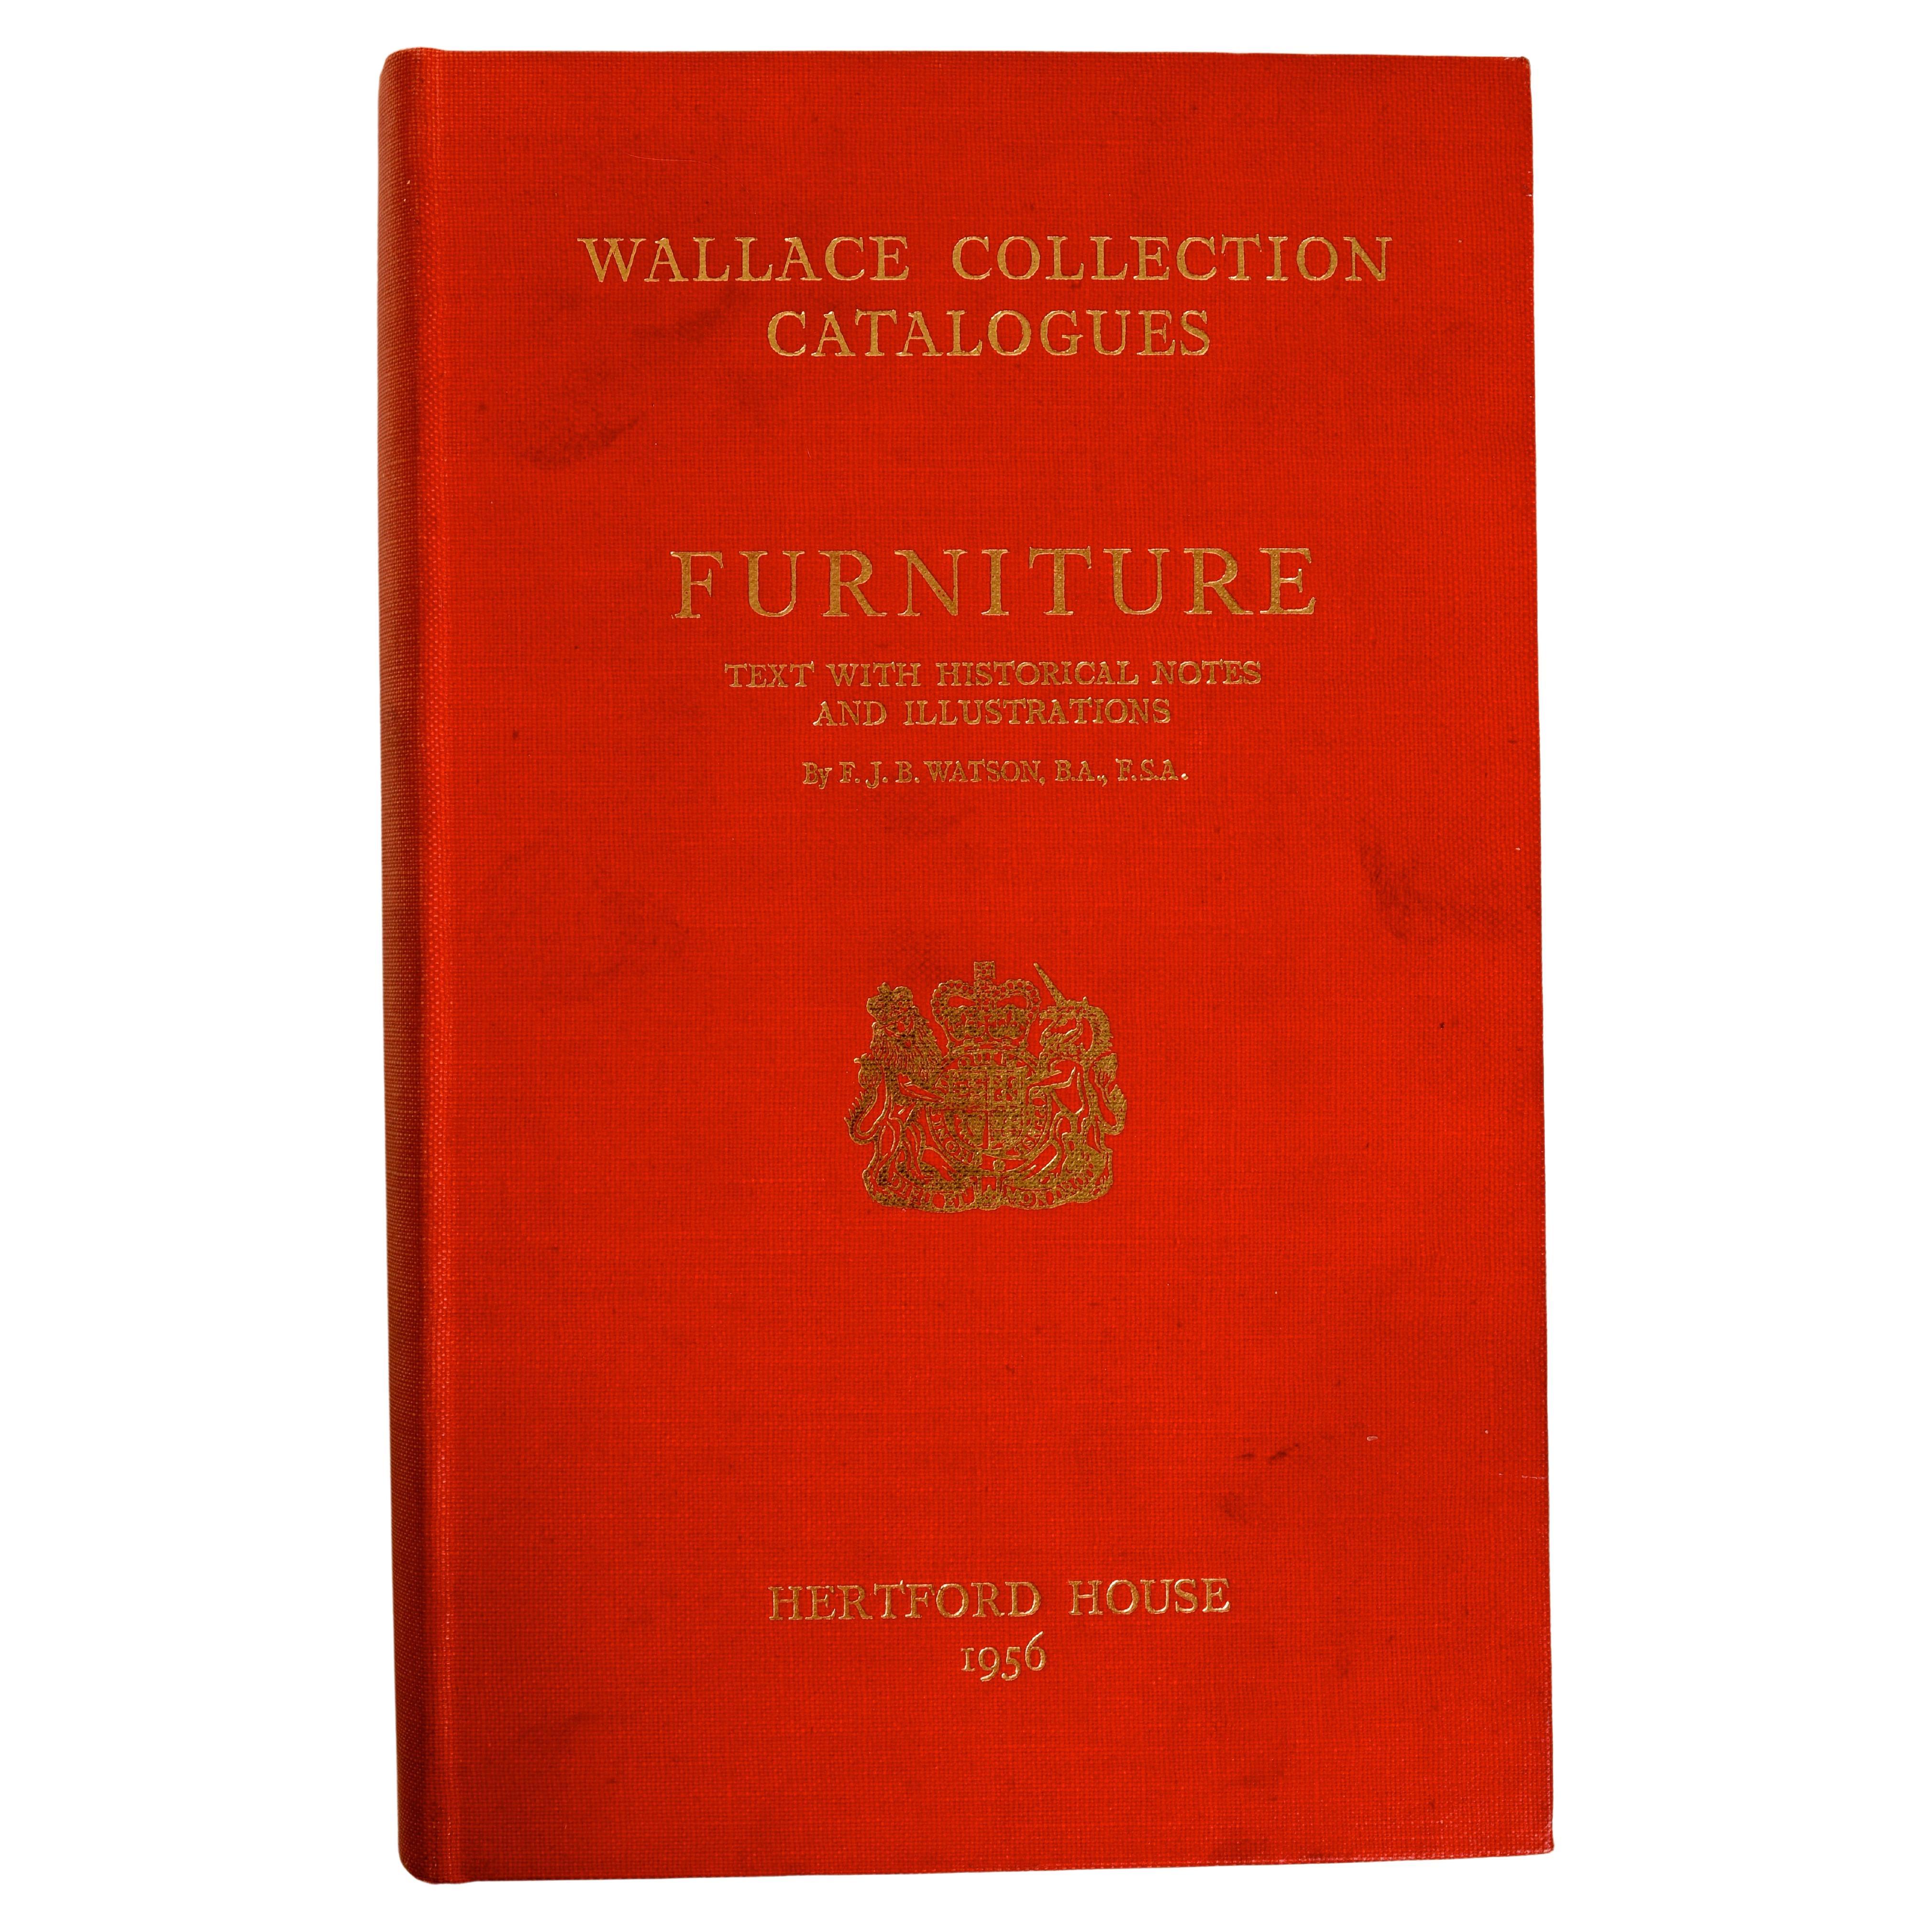 Wallace Kollektionskataloge. Furniture With Historical Notes and Illus. 1st Ed.